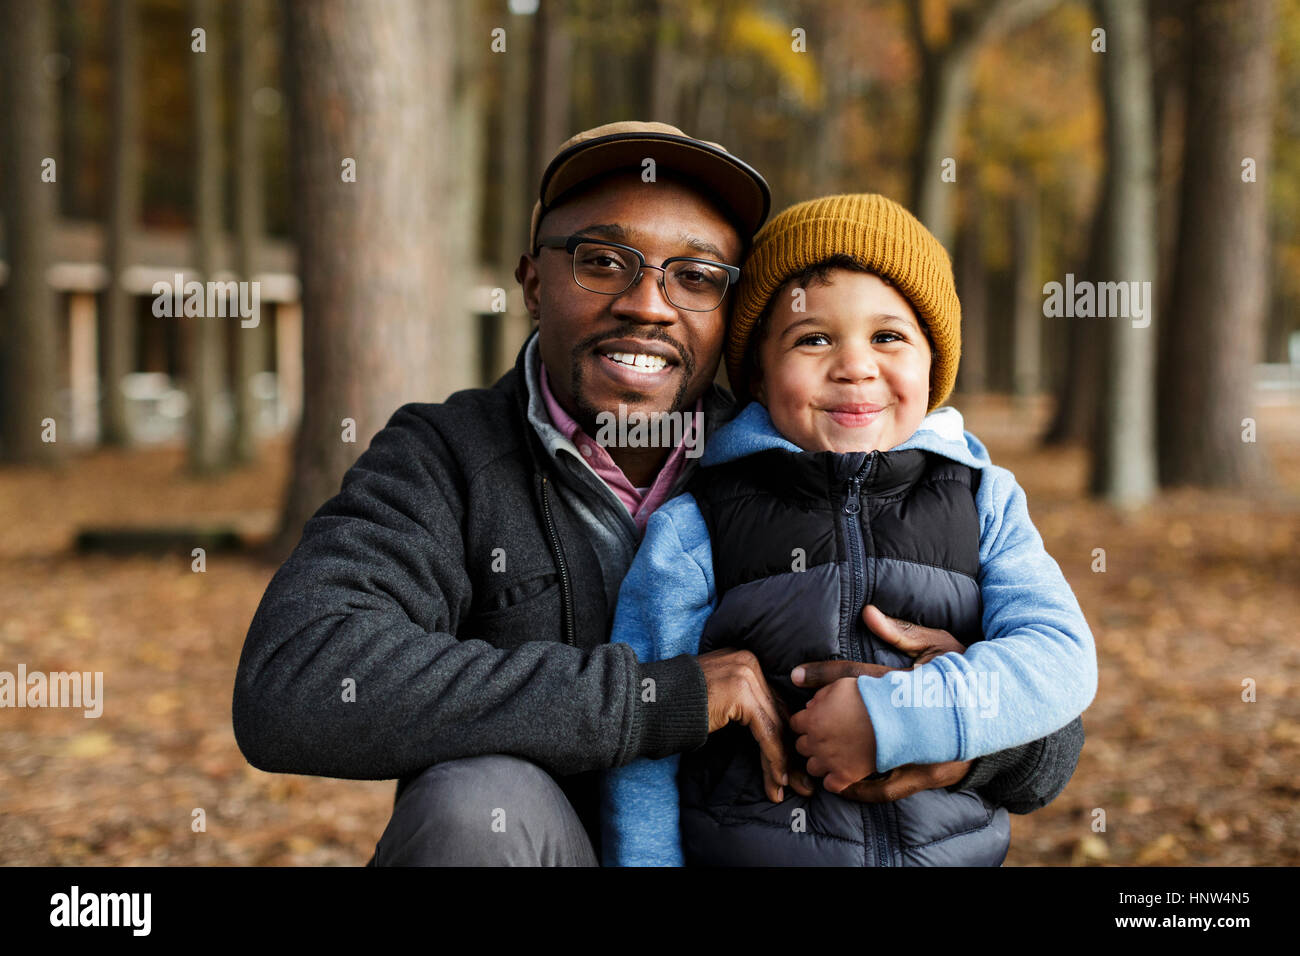 Portrait of smiling father and son hugging in park Banque D'Images